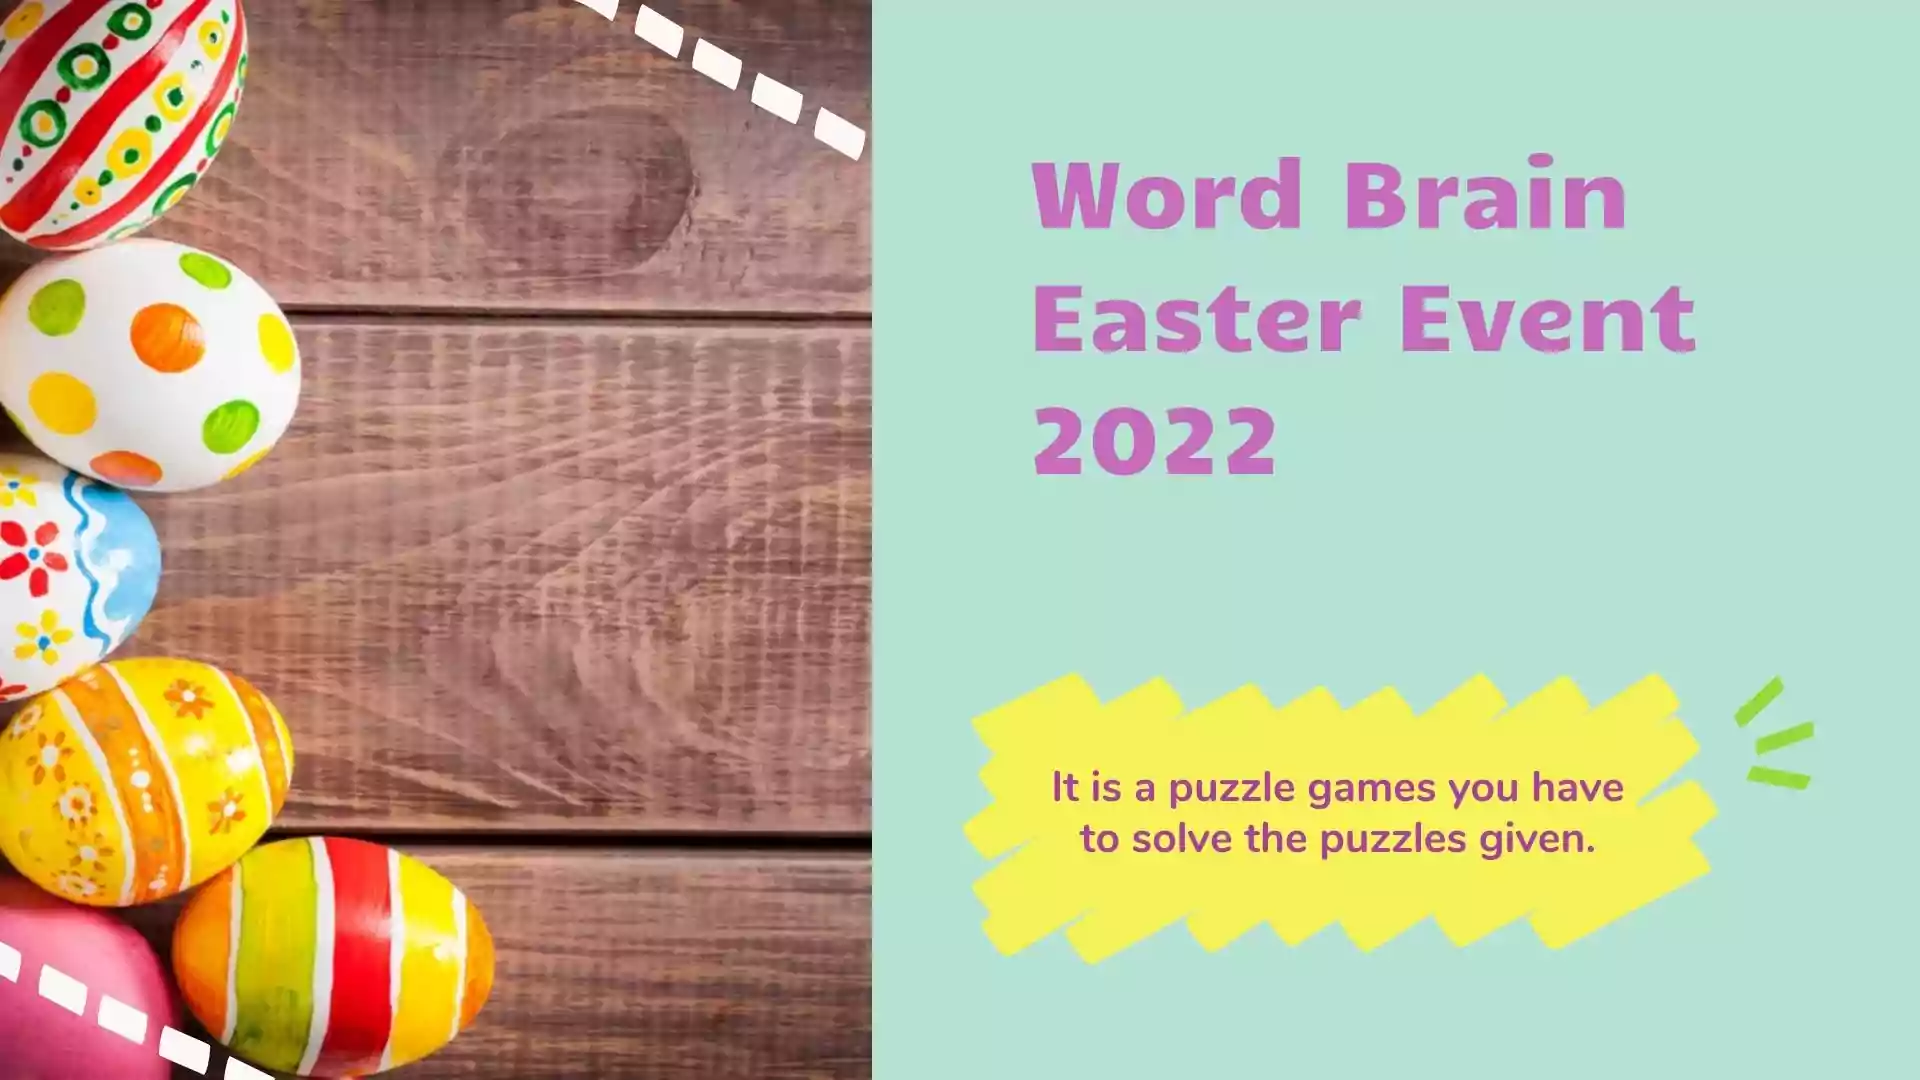 Word Brain Easter Event 2022